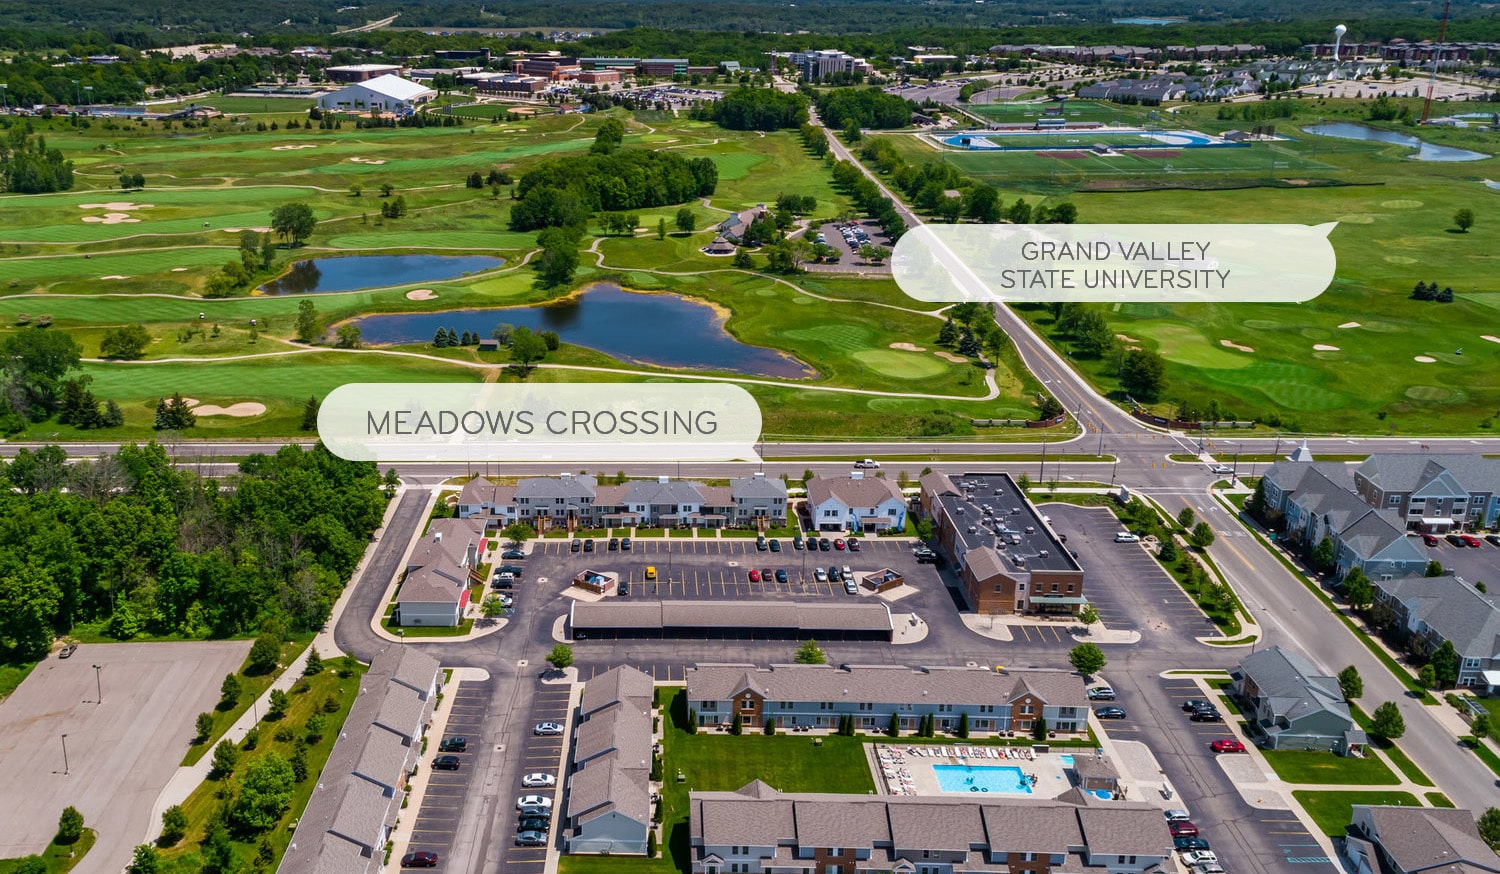 map of Meadows Crossing and Grand Valley State University